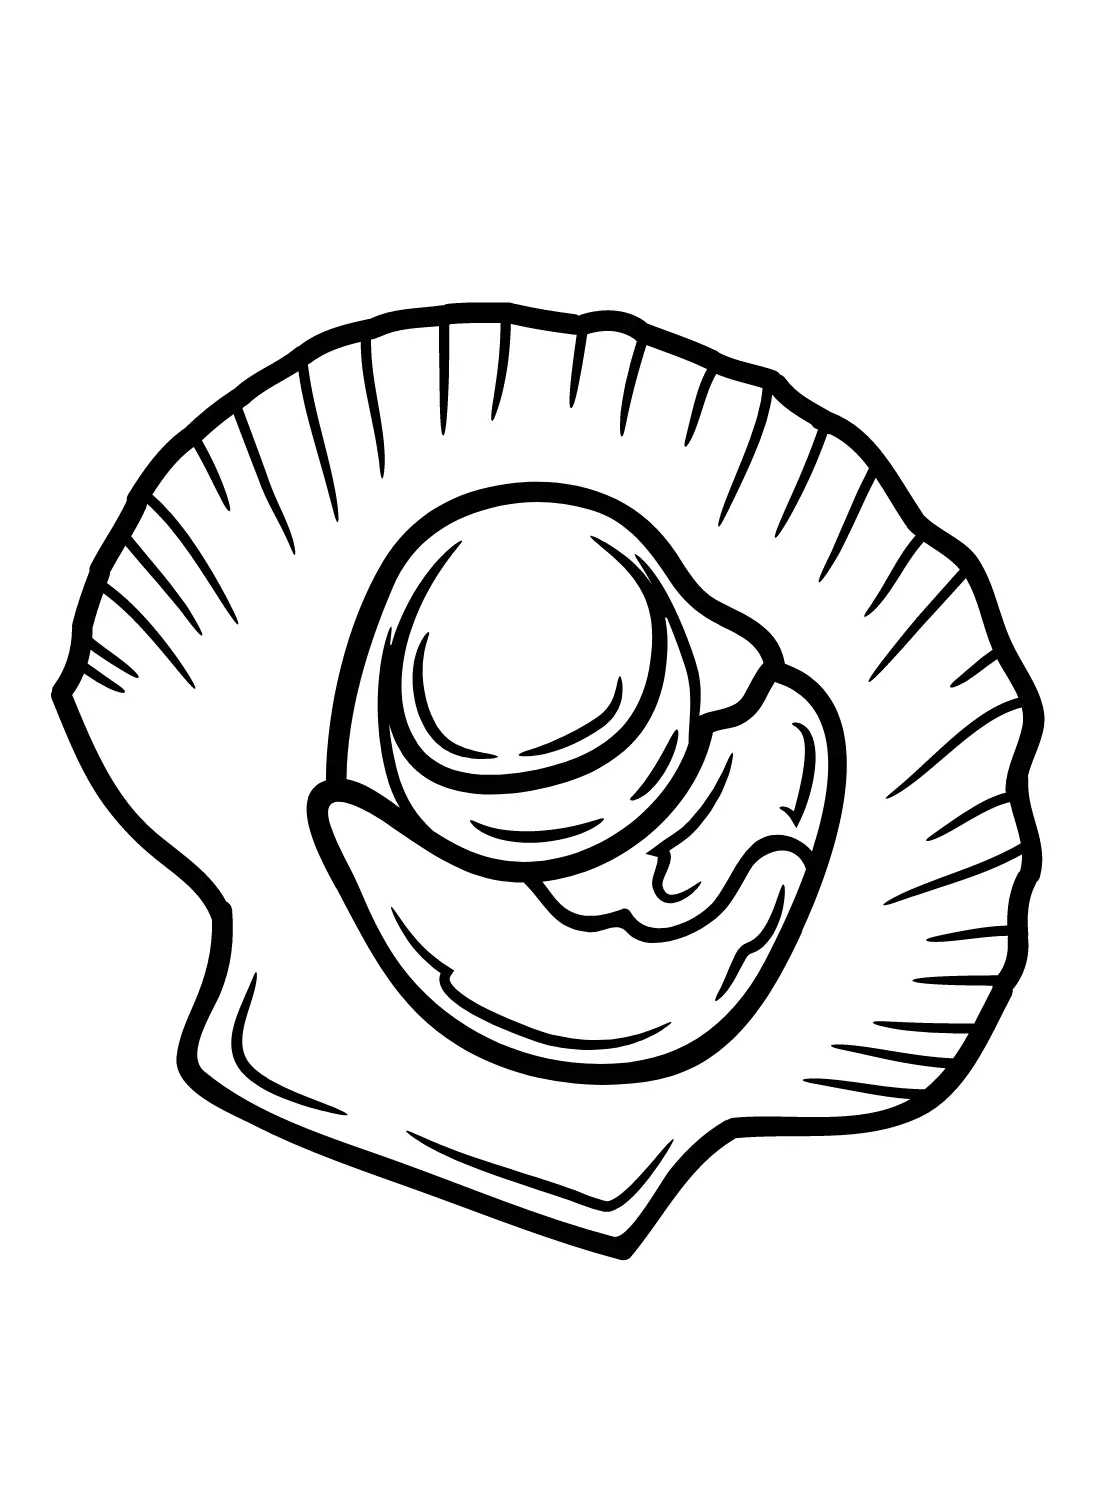 Scallop Coloring Pages